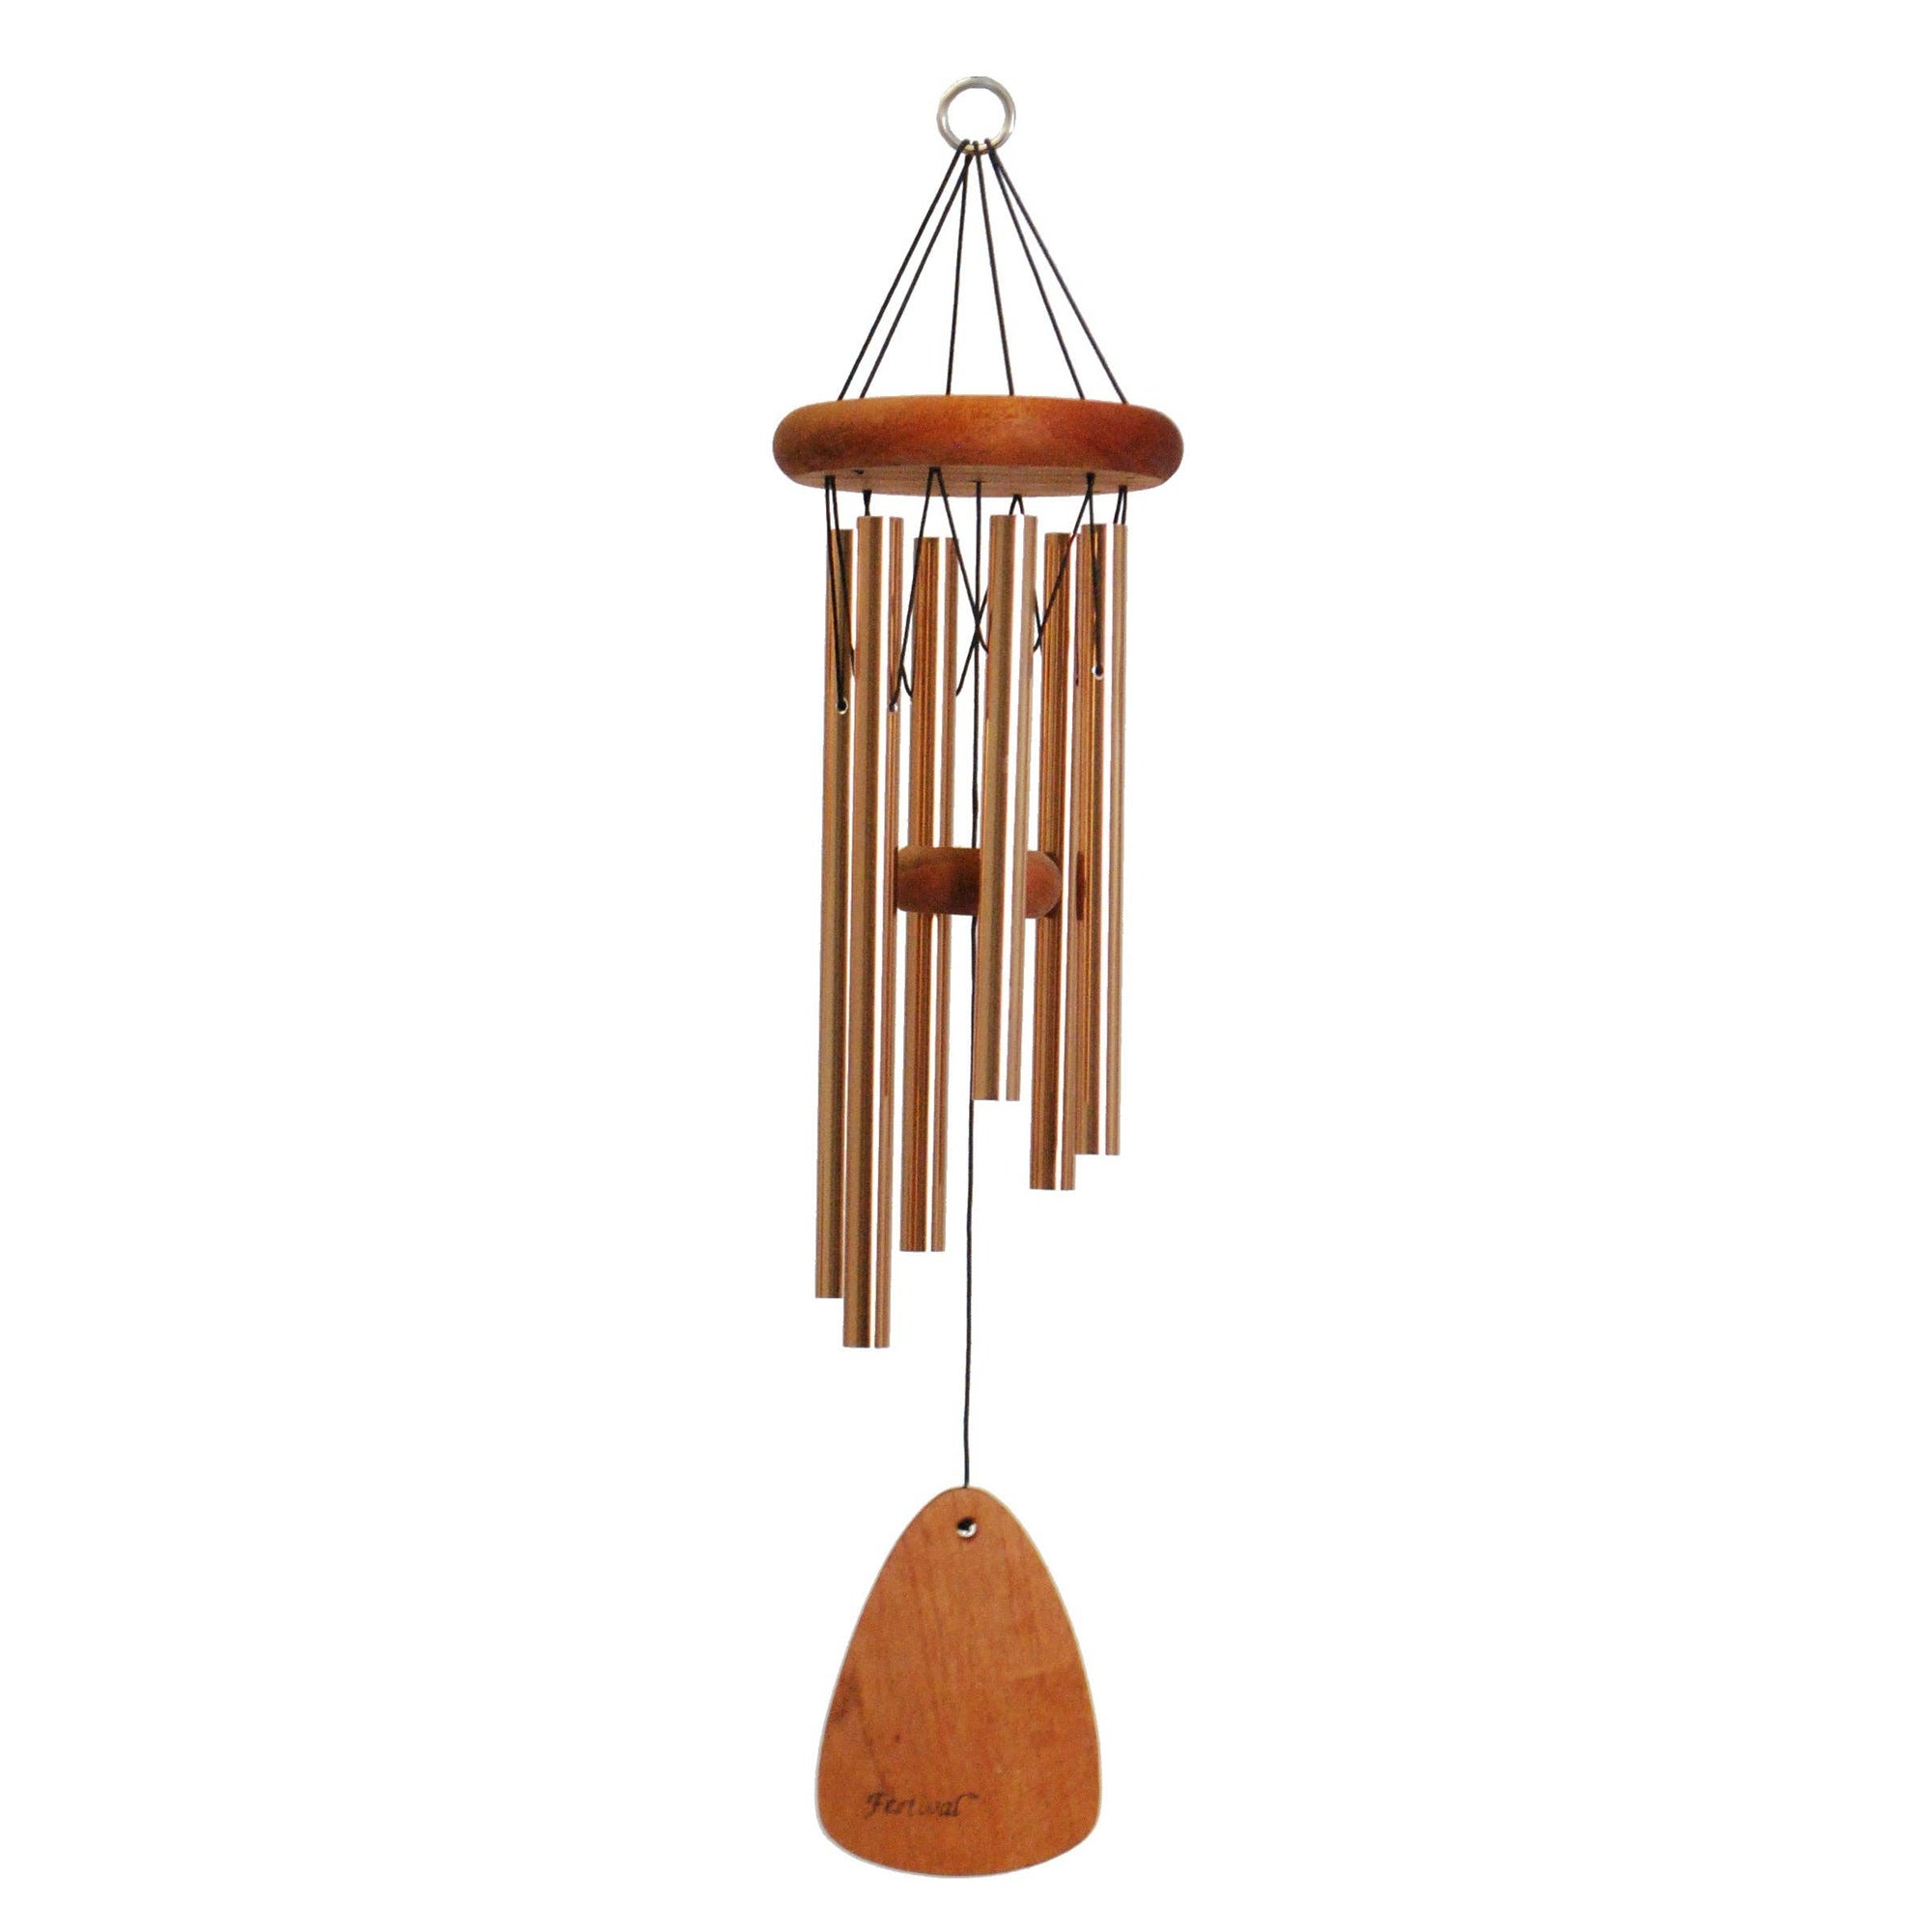 A Festival® 24-inch w/ 6 tubes Windchime that creates beautiful music with wooden sticks.